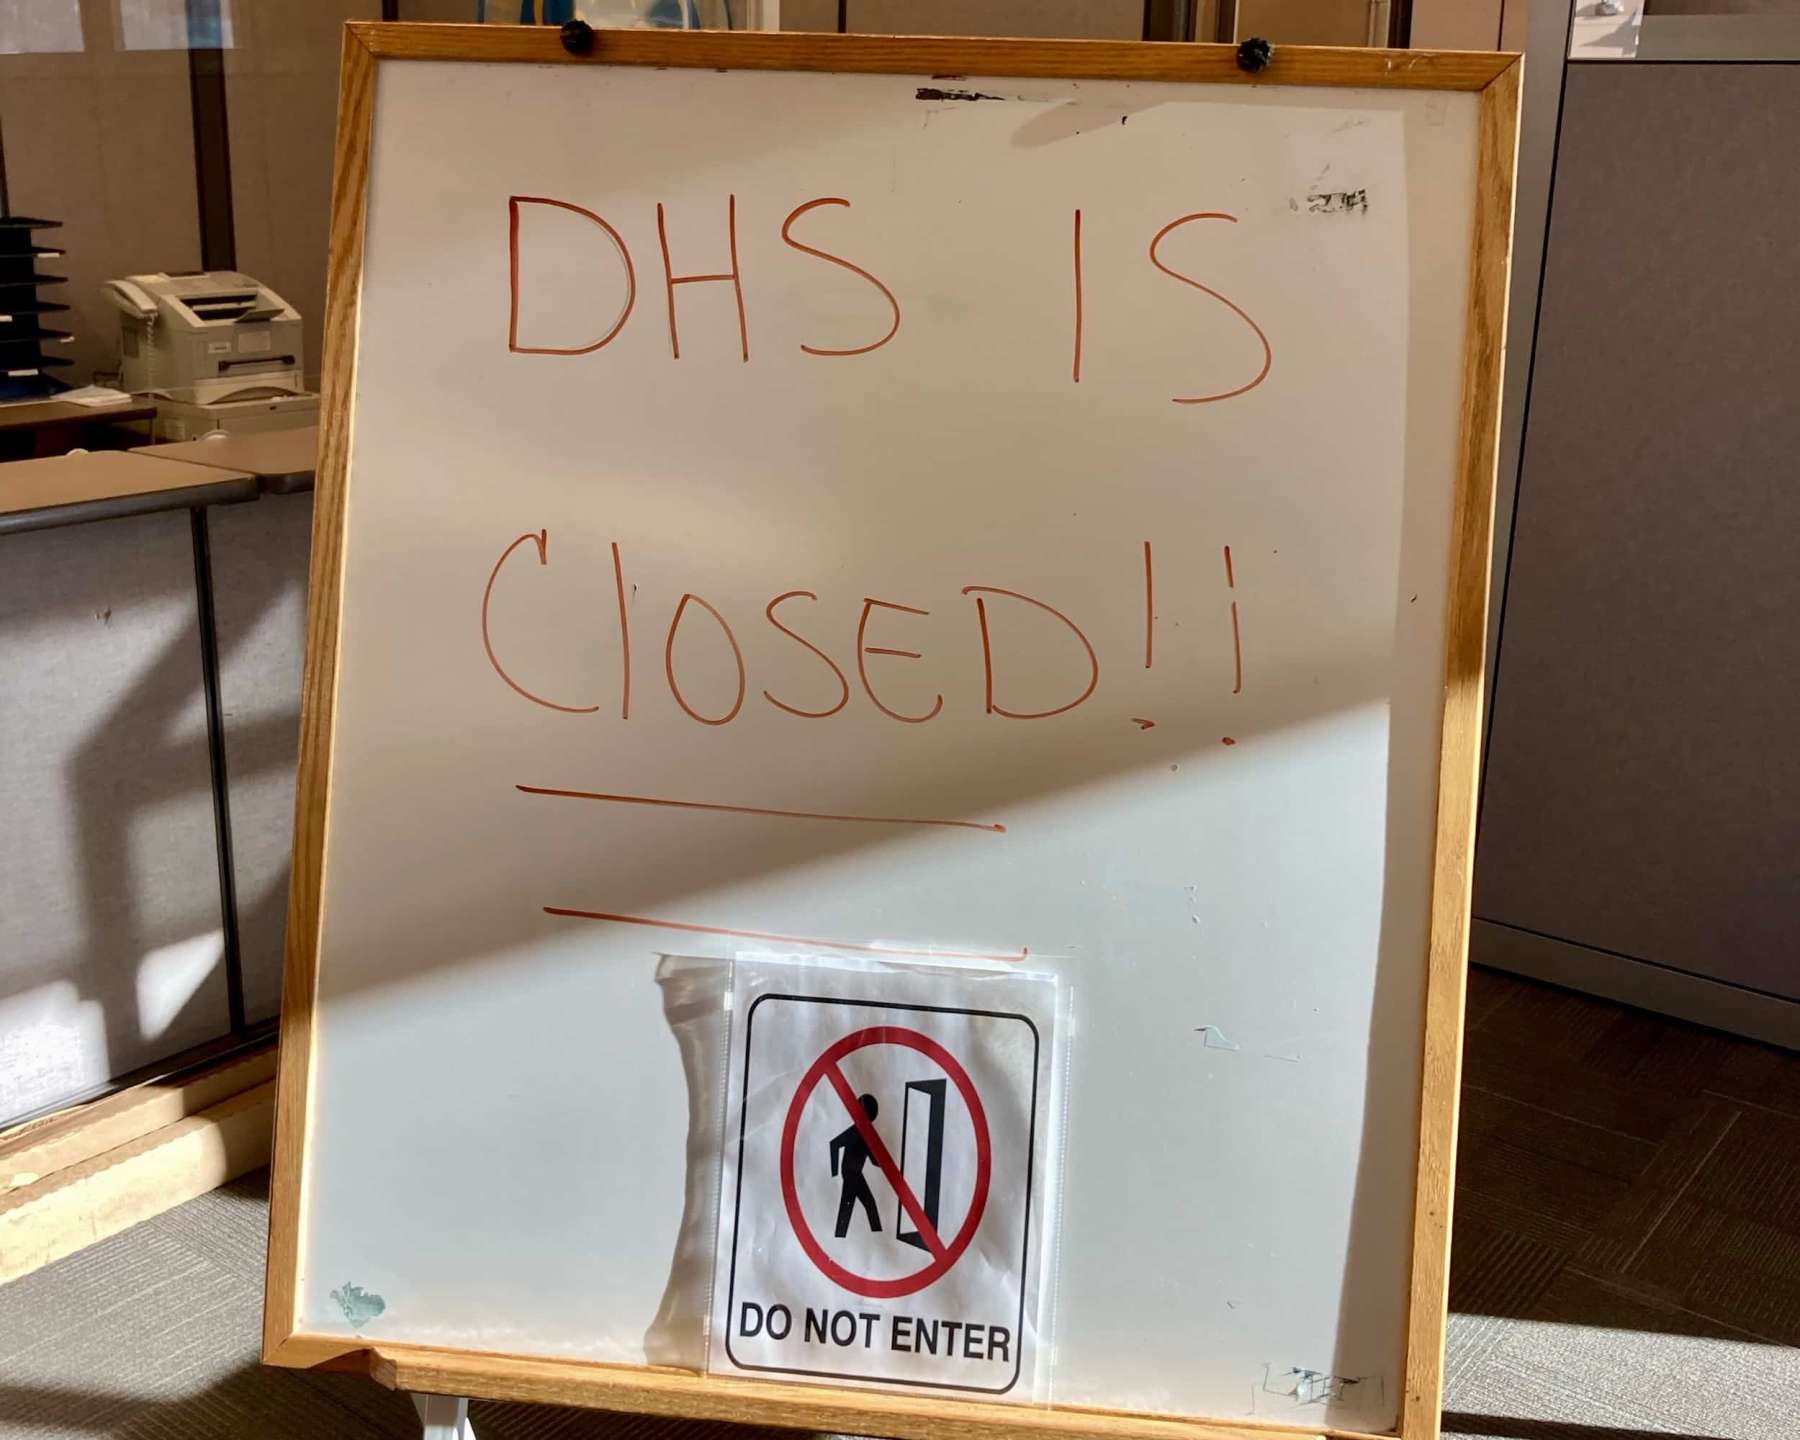 DHS offices throughout the state have been closed for 22 months…